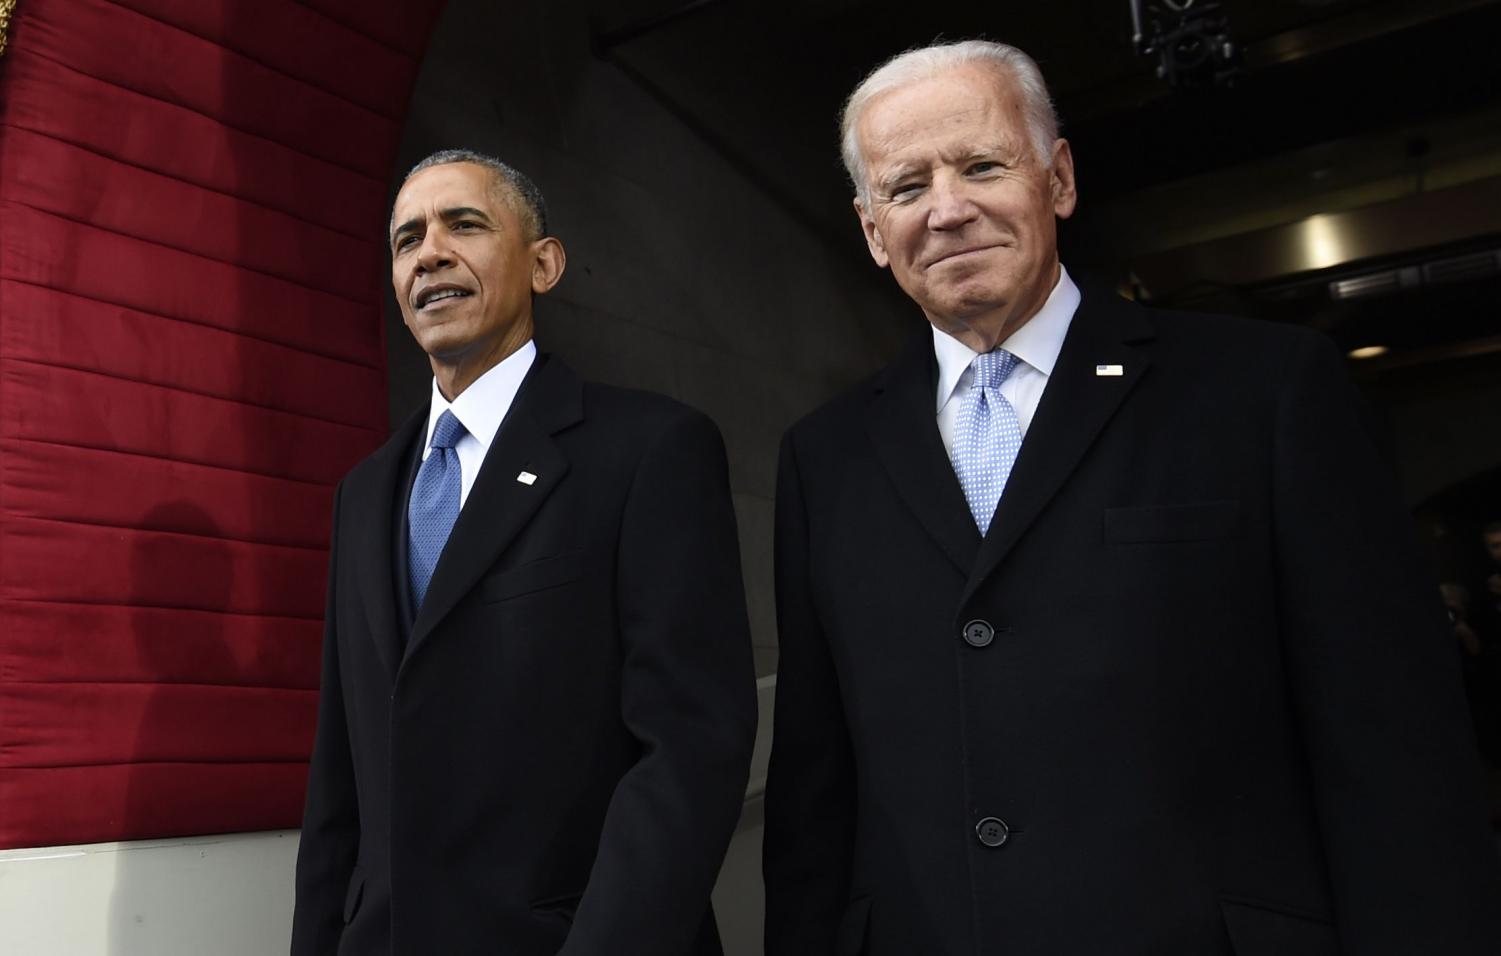 Former+U.S.+President+Barack+Obama+and+former+Vice+President+Joe+Biden+arrive+for+the+Presidential+Inauguration+of+Donald+Trump+on+January+20%2C+2017.+Political+Union+discussed+the+impact+of+coronavirus+on+Biden%2C+the+presumptive+Democratic+nominee%2C+and+his+chances+to+beat+Trump%2C+the+incumbent+president%2C+in+the+general+election.